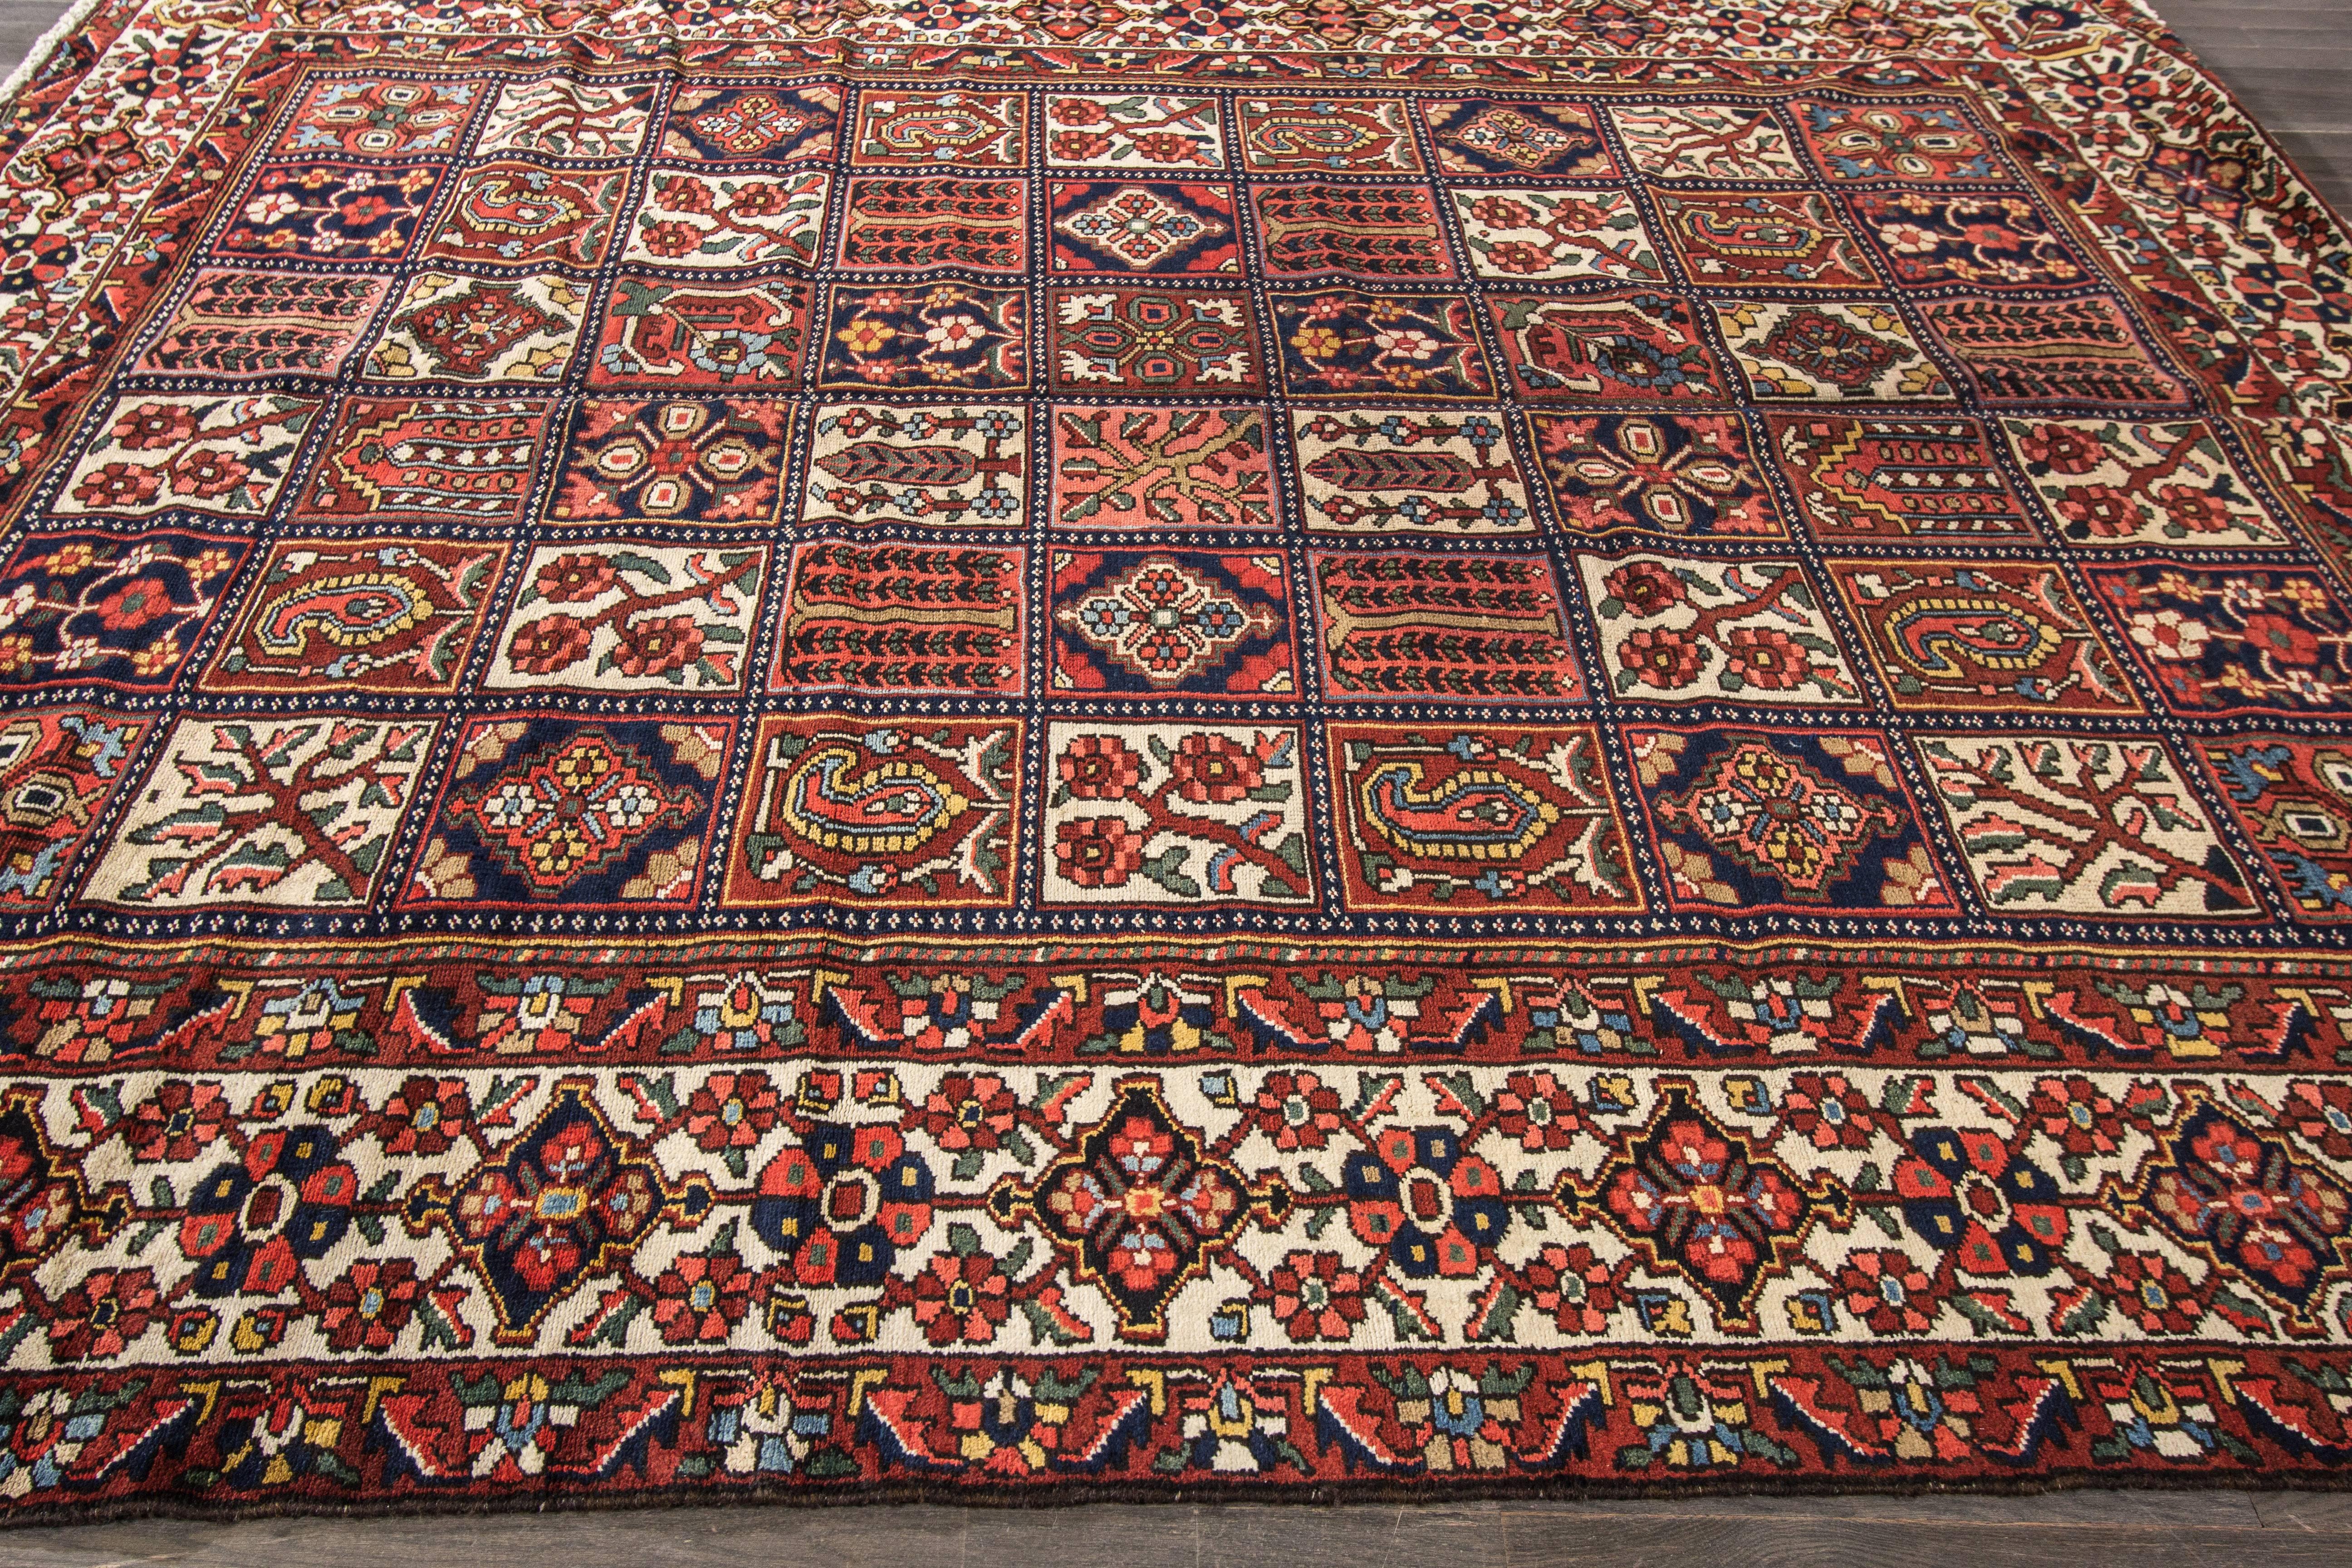 This beautiful Antique Persian Bakhtiari hand-knotted design rug will make your floor look splendid. This collection is made in wool. It's measures are: 9'.2 x 11'.2
This antique Persian Bakhtiari rug was made in Iran.